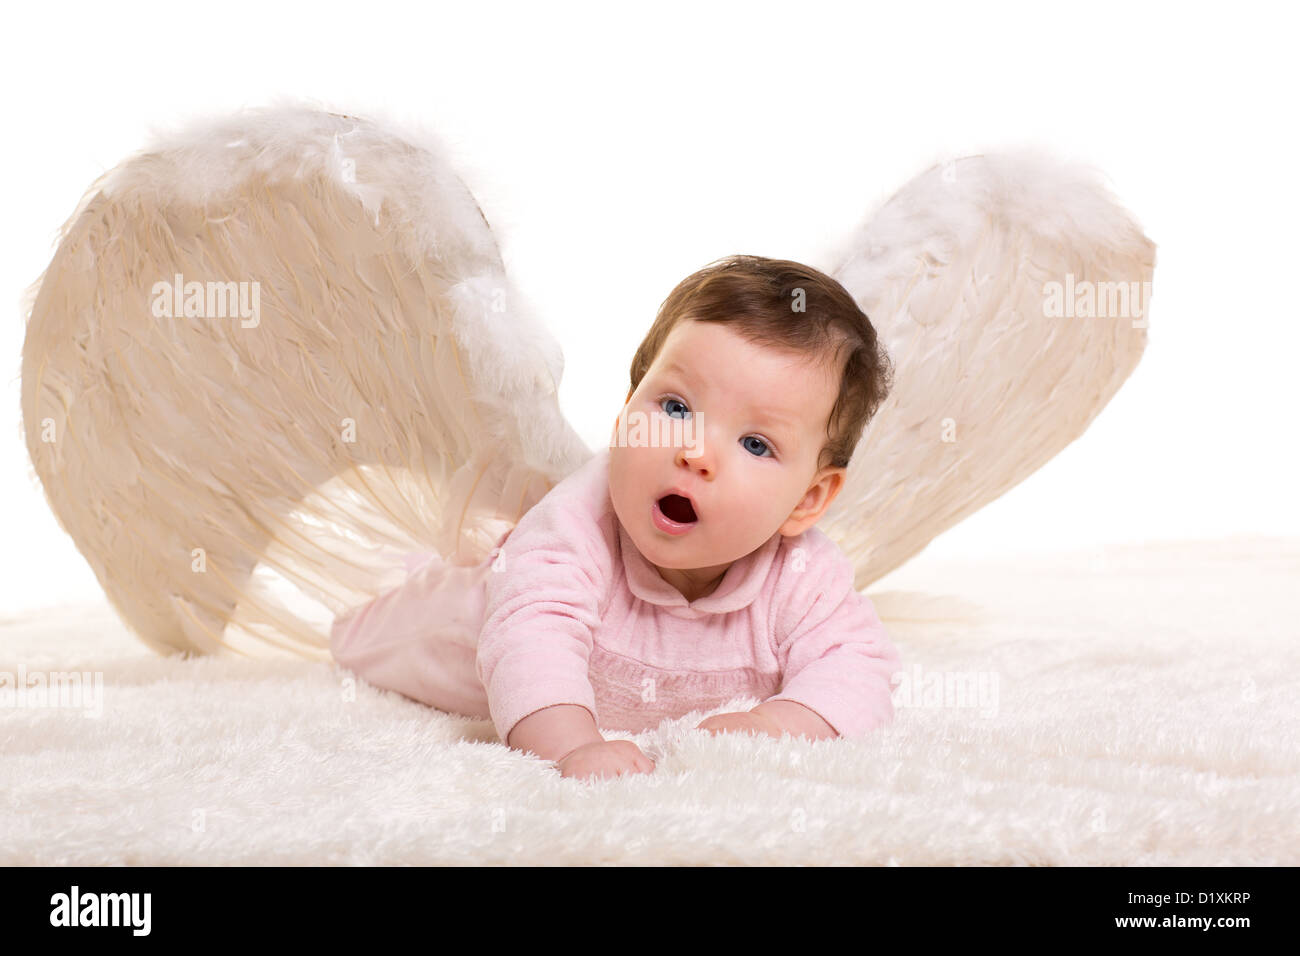 baby girl angel with feather white wings on white fur Stock Photo